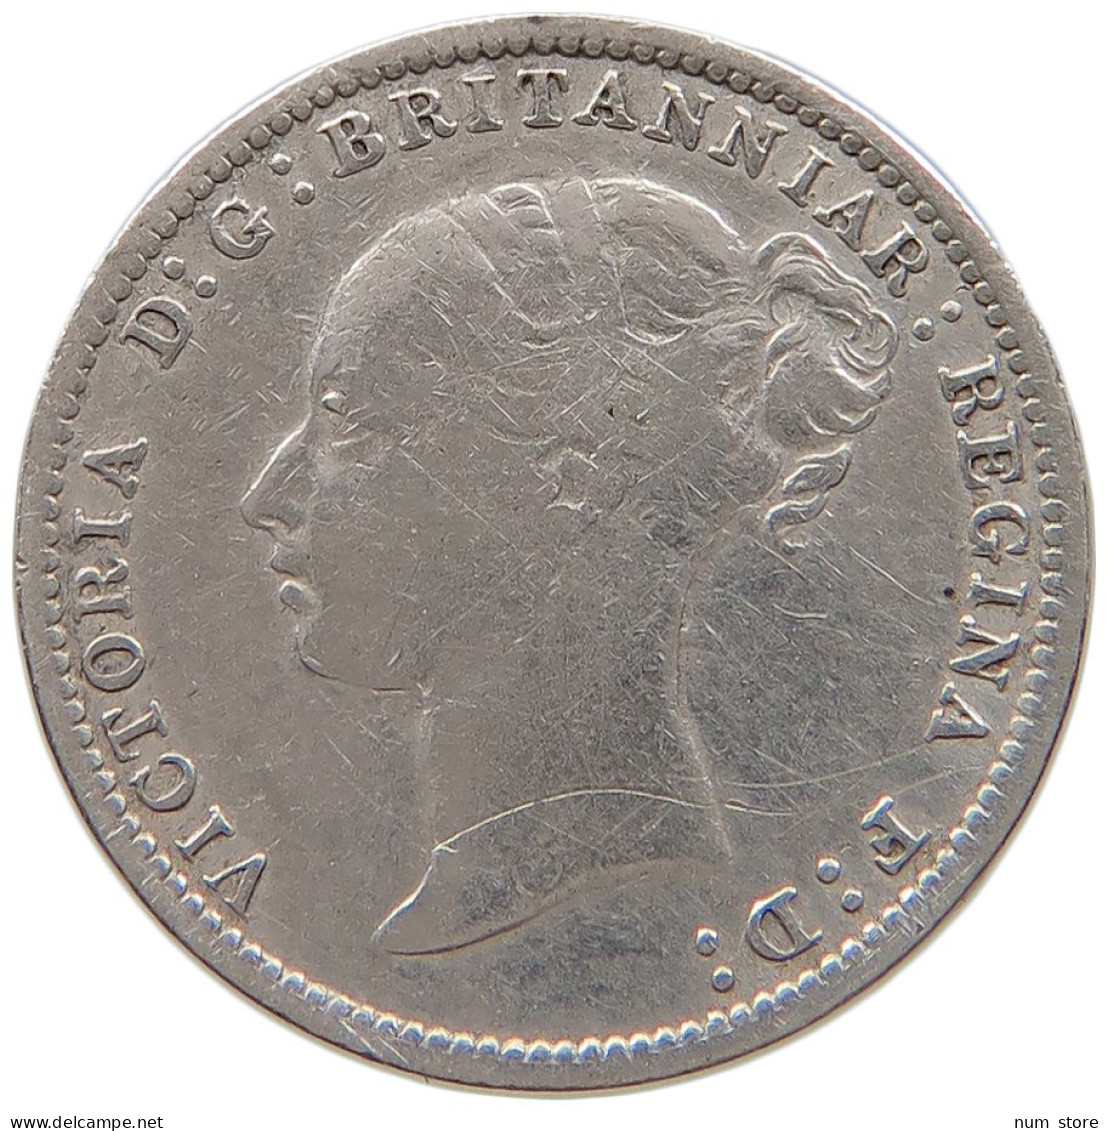 GREAT BRITAIN THREEPENCE 1887 Victoria 1837-1901 #t158 0447 - F. 3 Pence